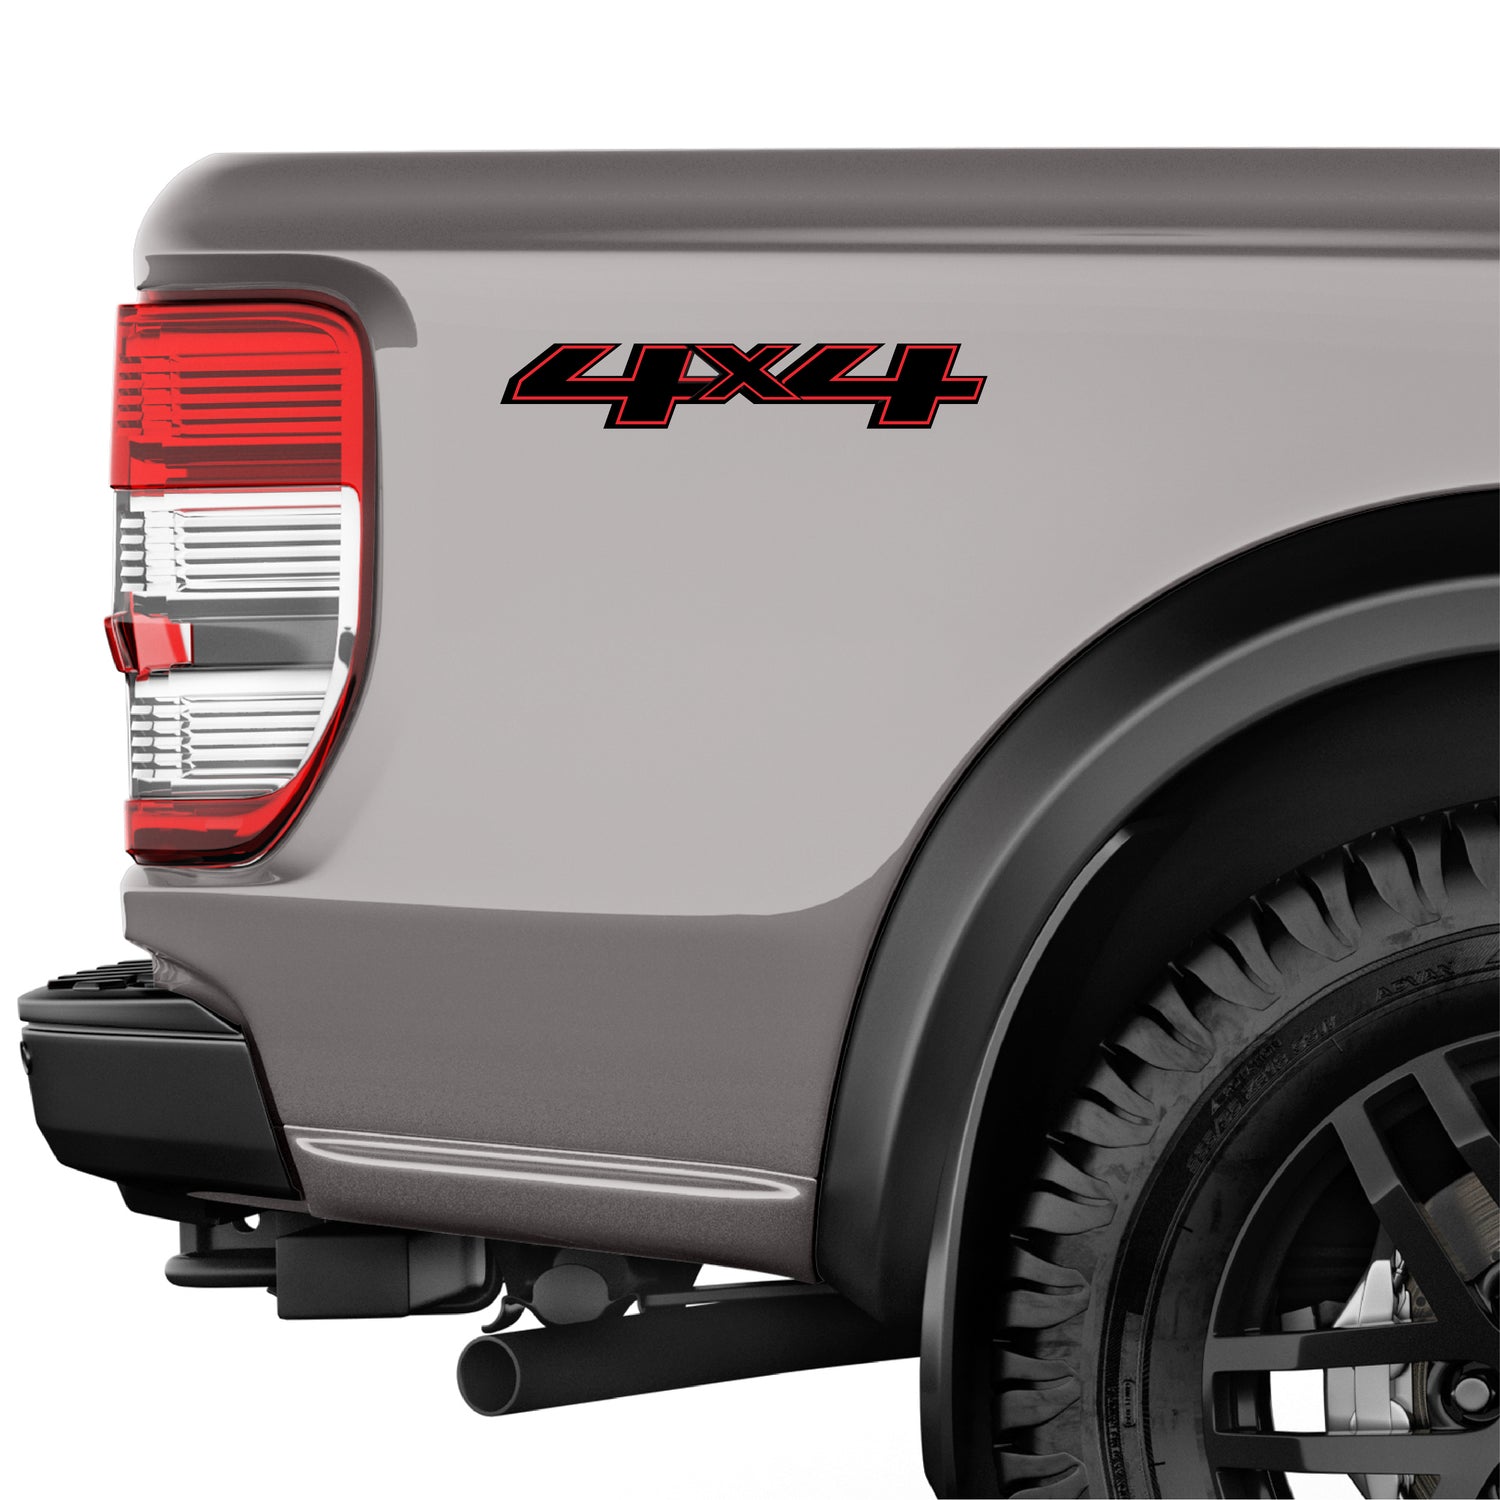 MC Sierra 4x4 Red Black Decals Bedside Replacement Stickers - TiresFX